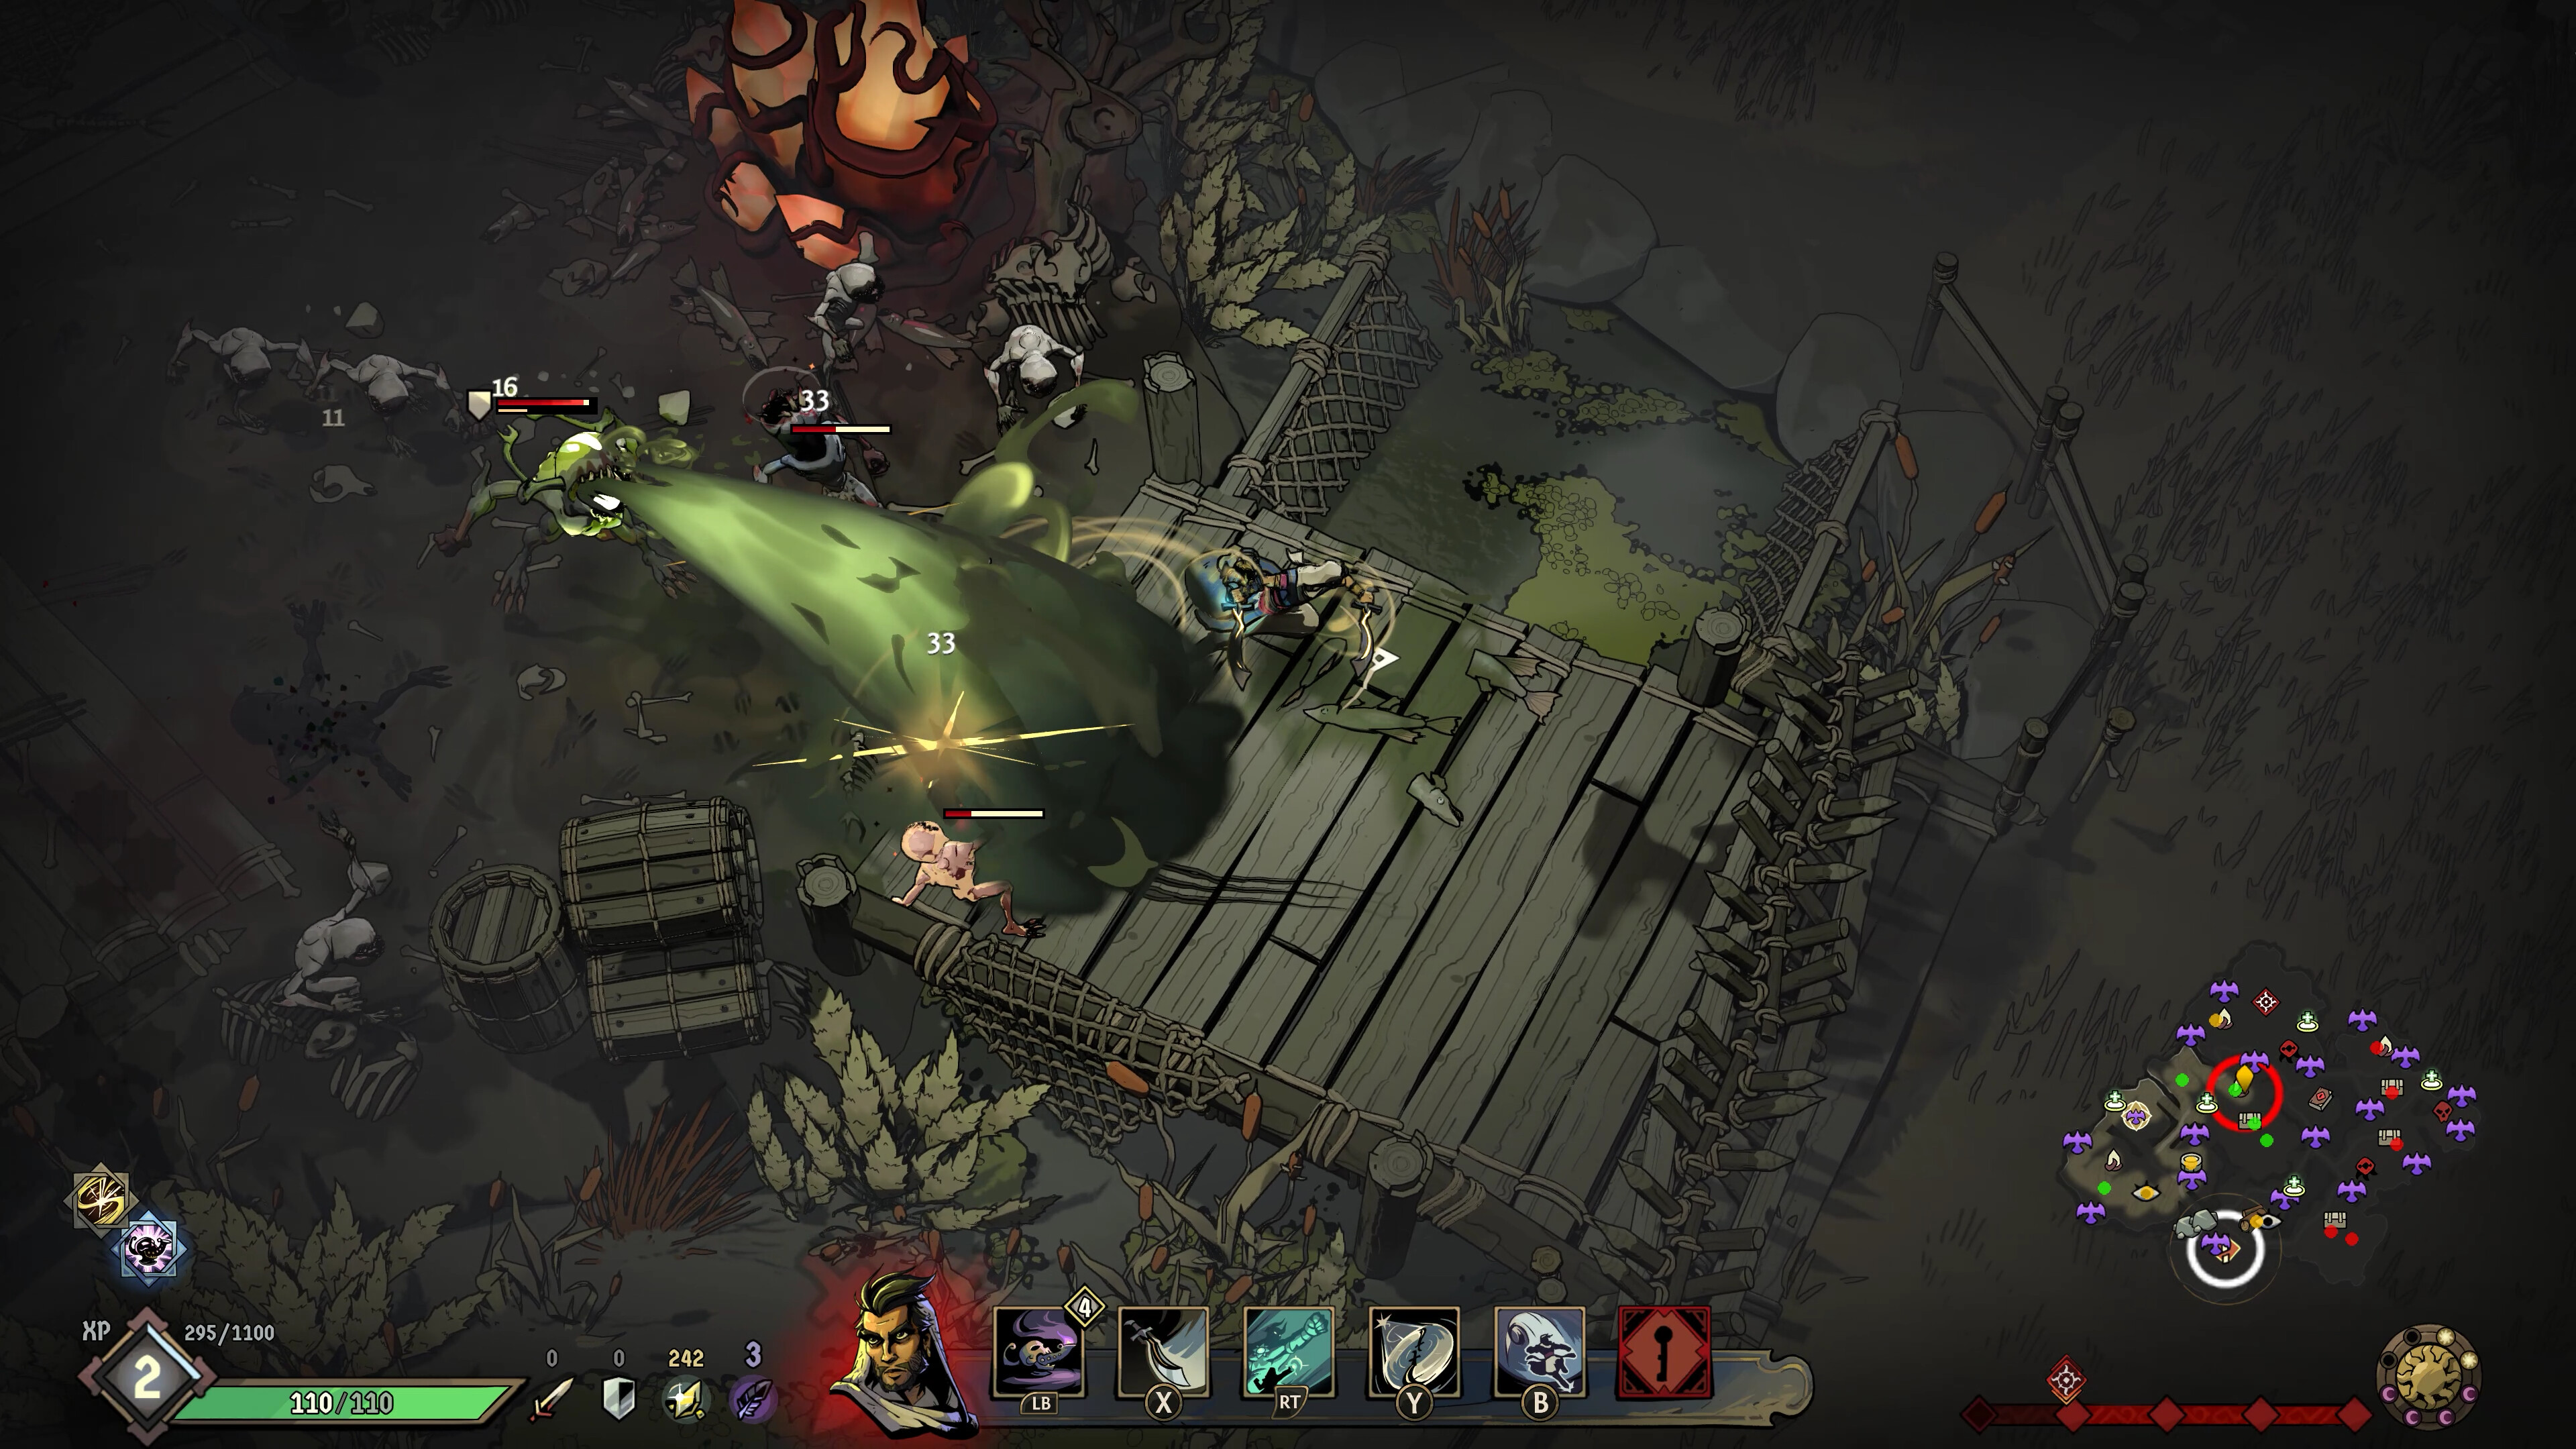 A battle against a swarm of monsters, including a vomiting ghoul, in Ravenswatch.